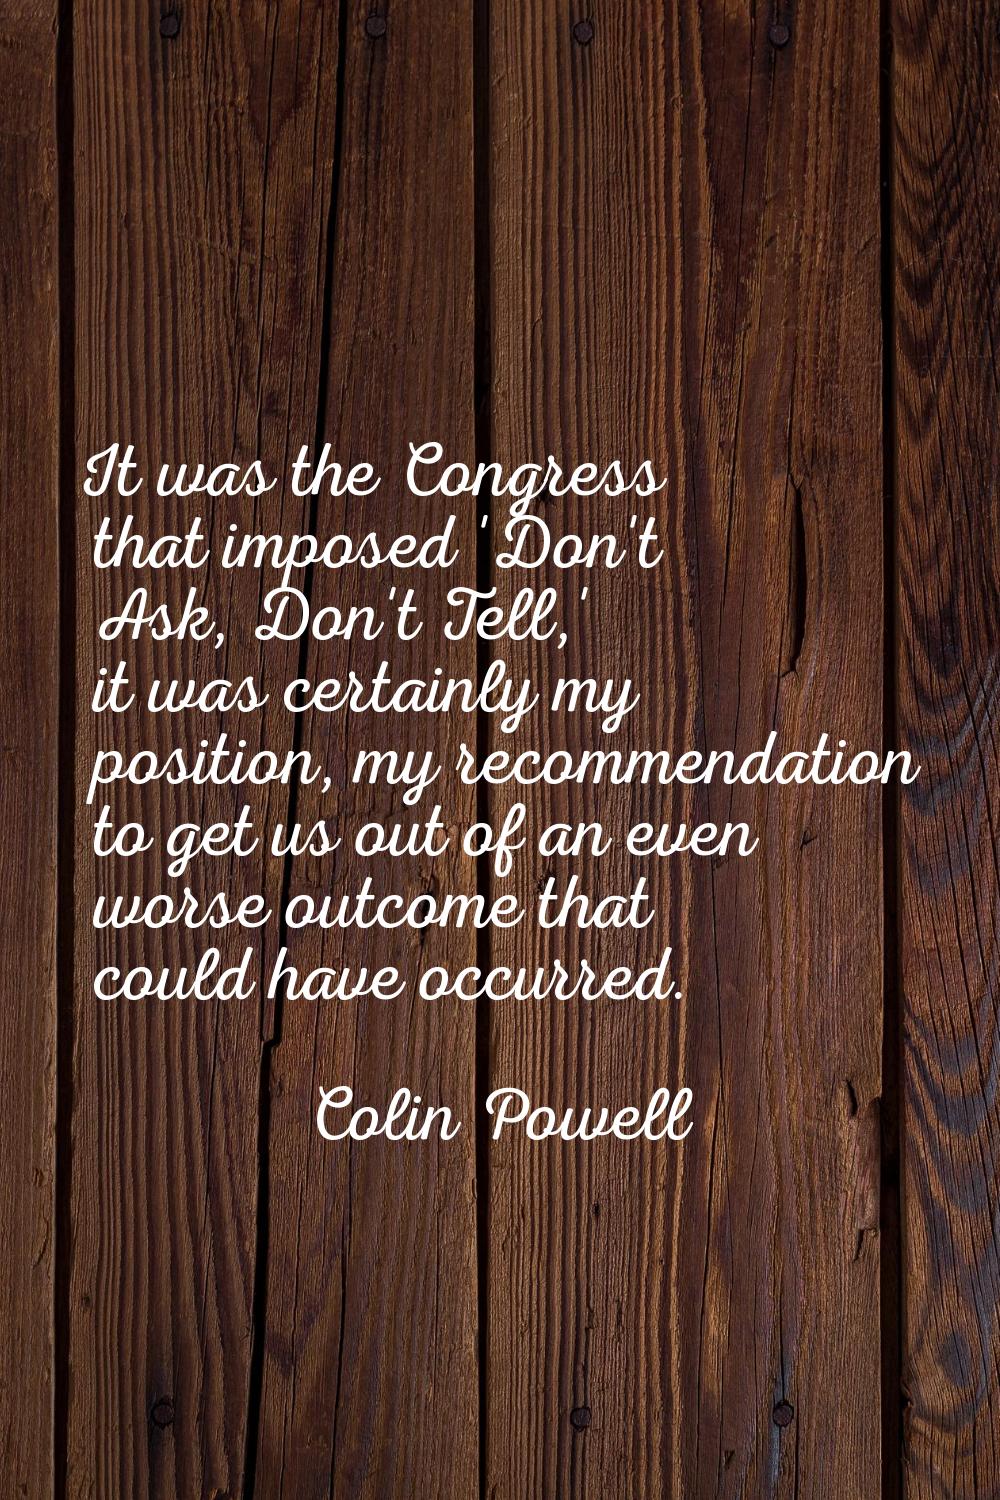 It was the Congress that imposed 'Don't Ask, Don't Tell,' it was certainly my position, my recommen